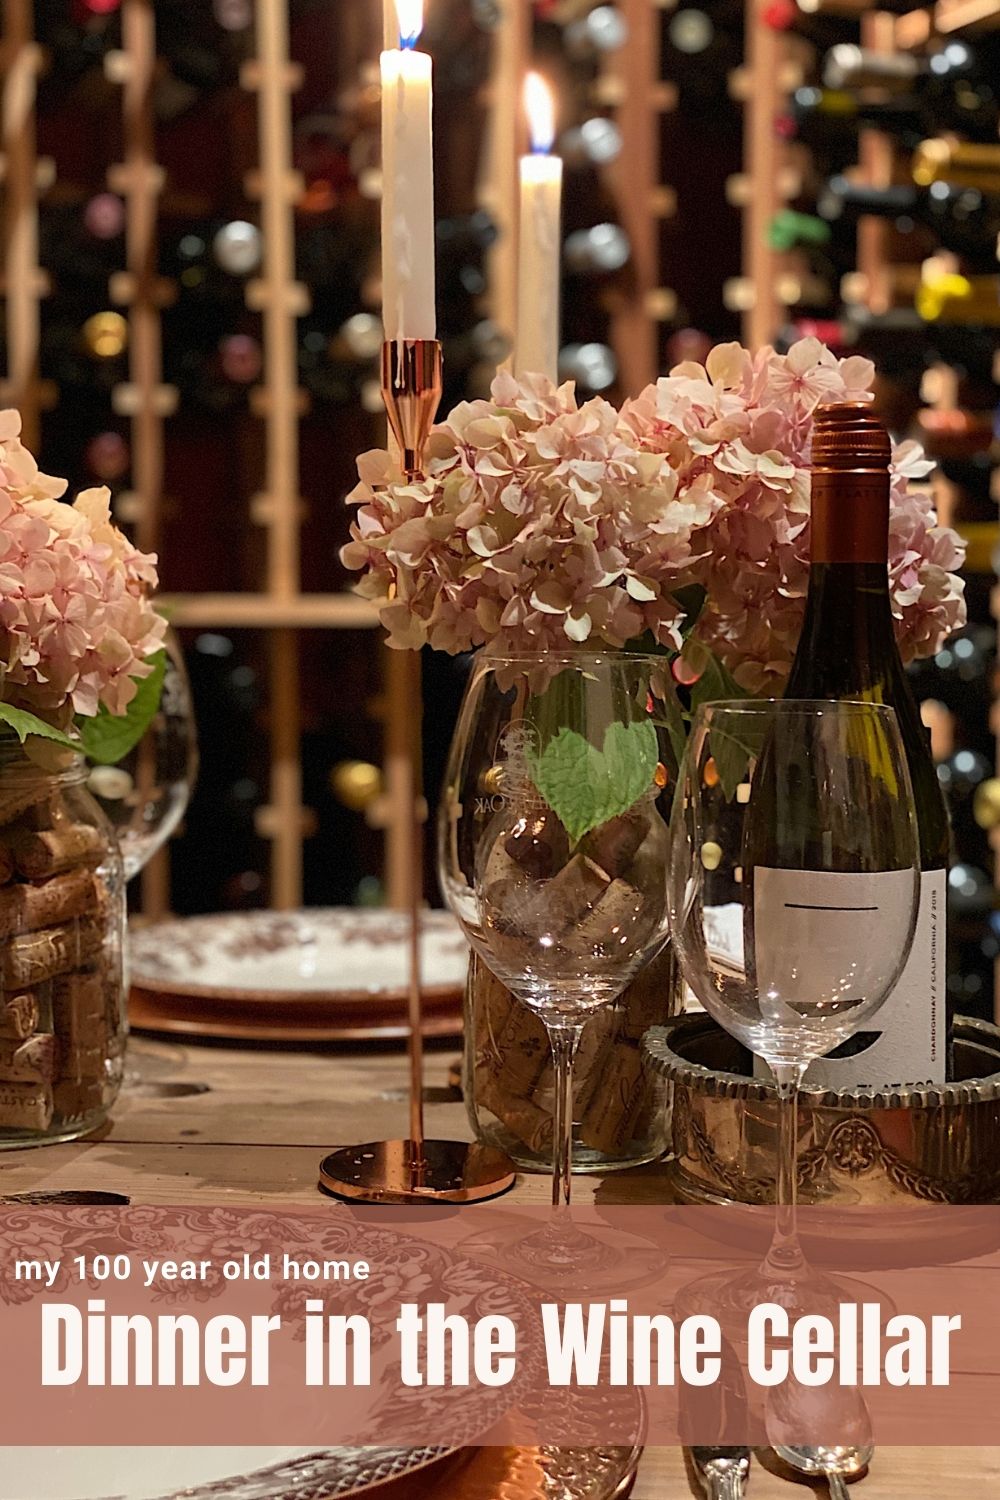 Creating a romantic dinner for two is so much fun to do. So I set up a table for two in our home wine cellar to surprise my husband!